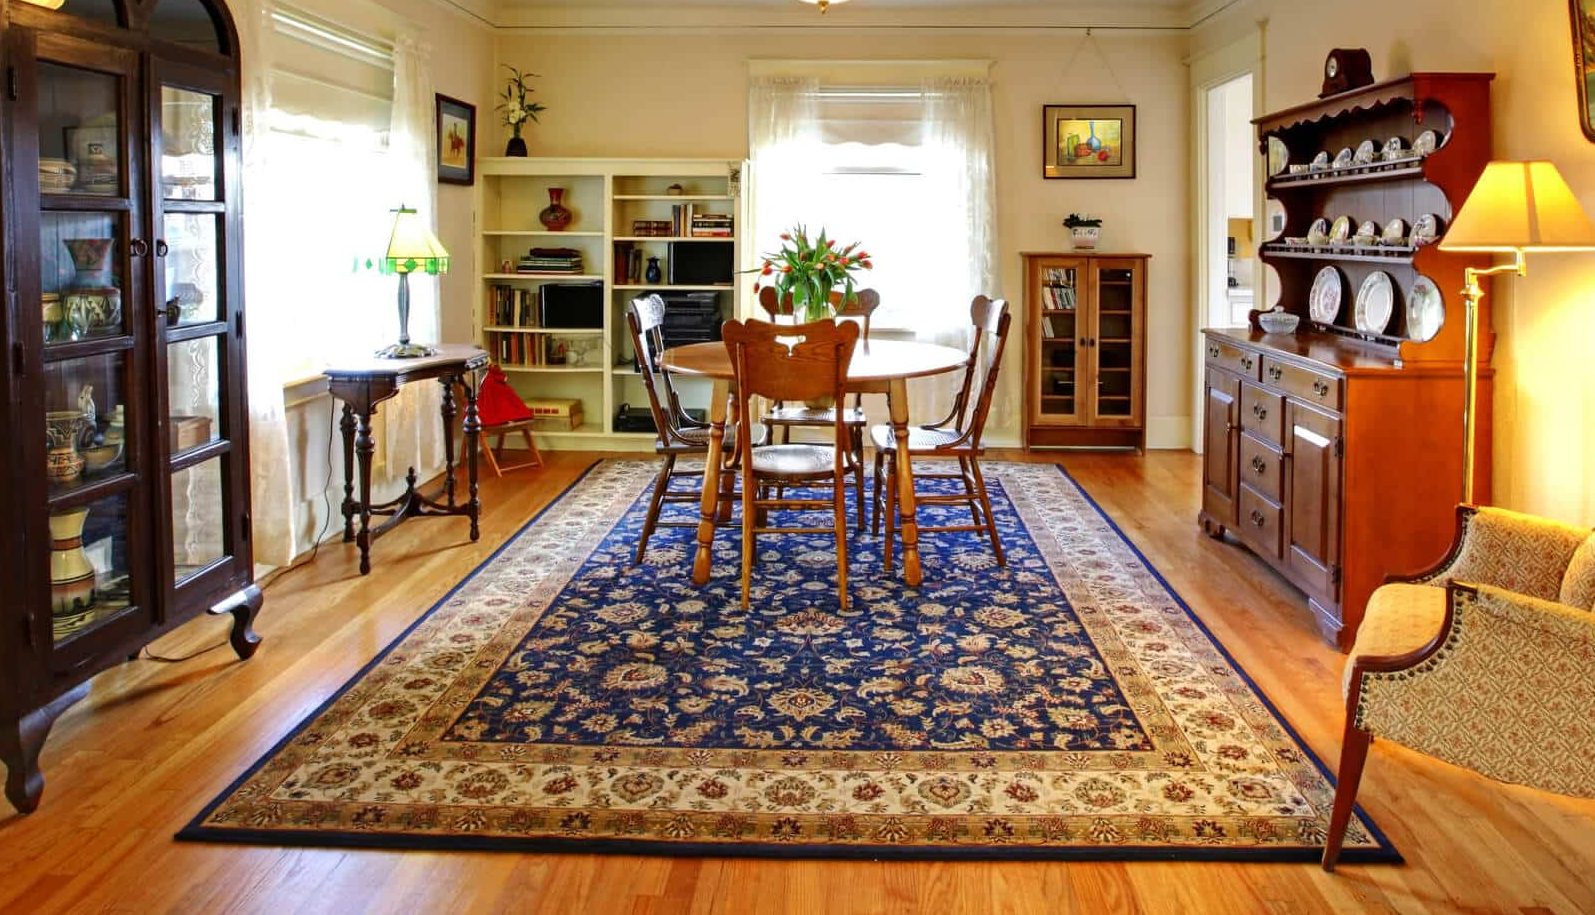 Area Rug Damage Your Hardwood Floor, How To Keep Area Rugs From Slipping On Wood Floors